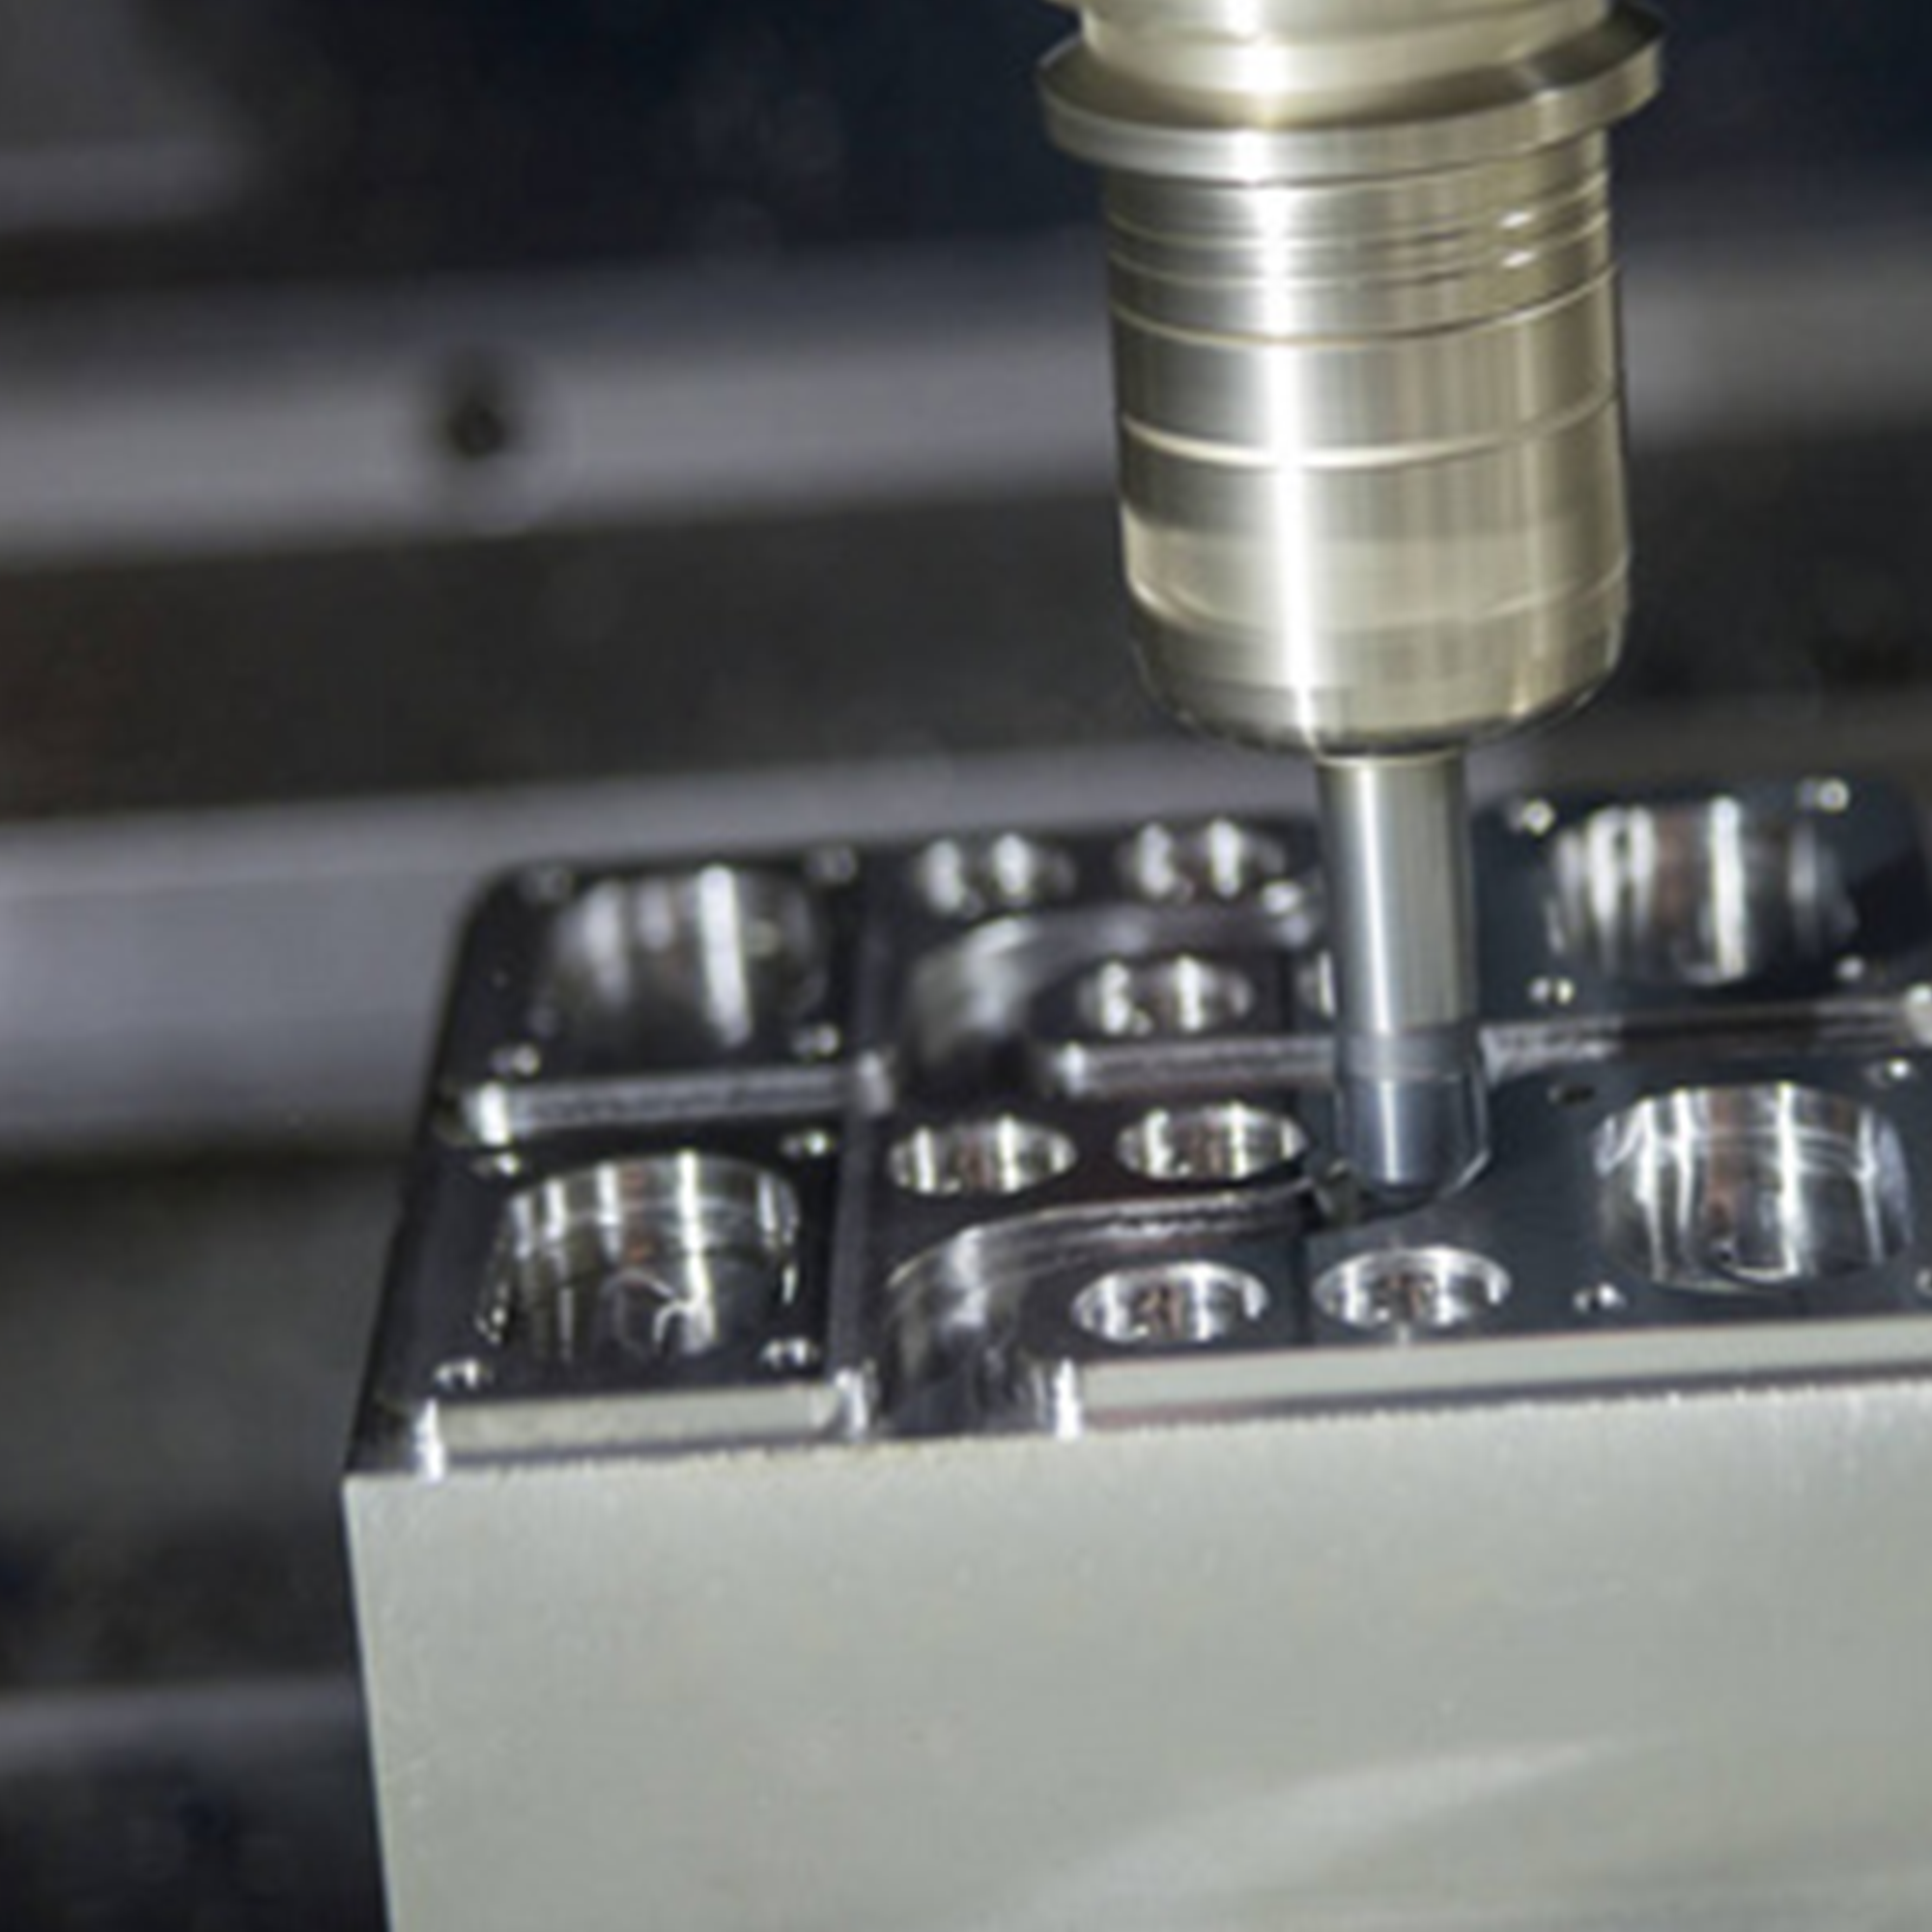 Do you know the advantages and disadvantages of machining centers?